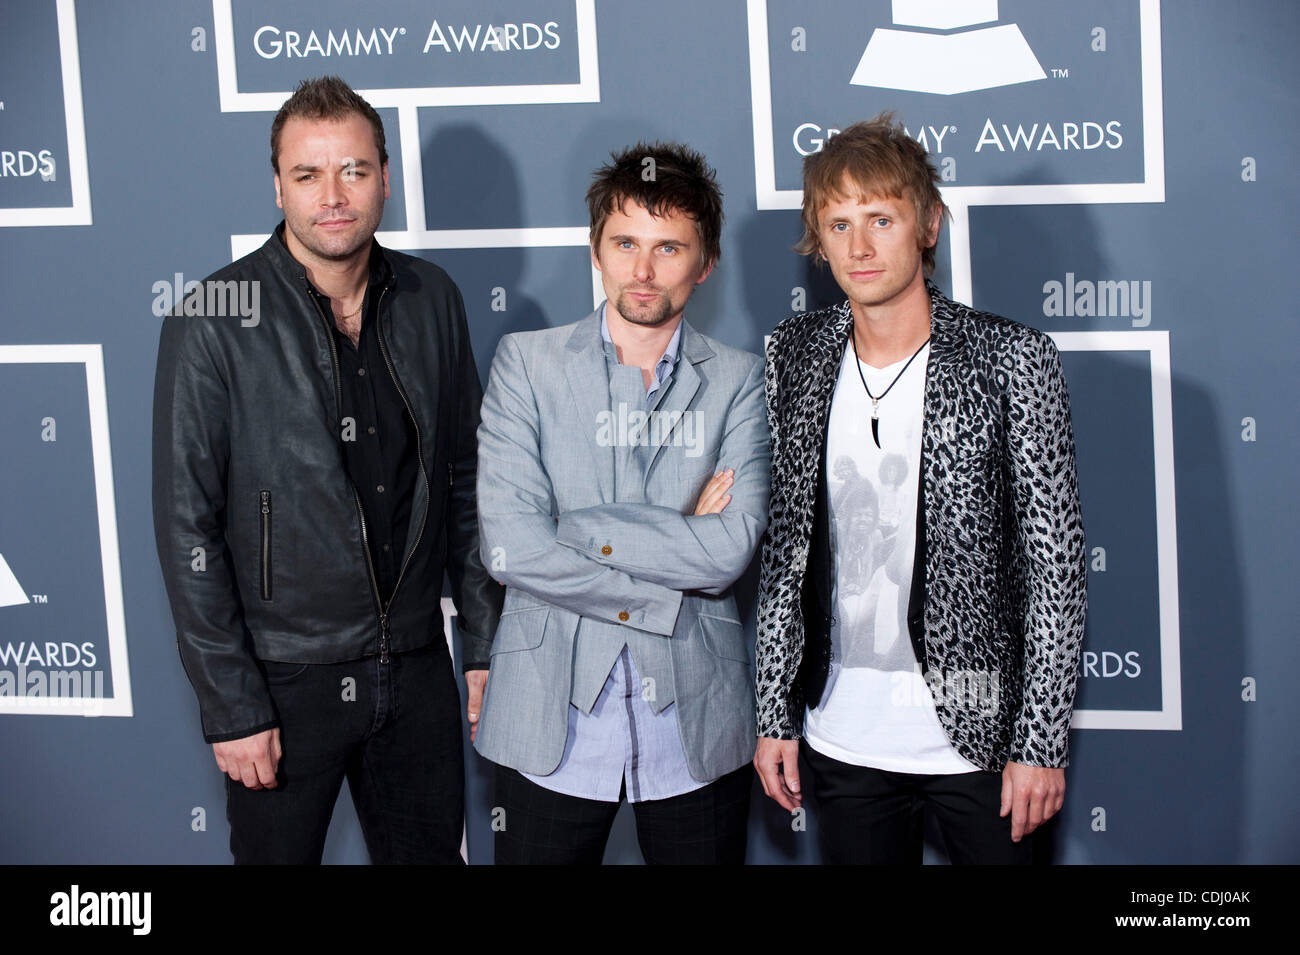 Feb 13, 2011 - Los Angeles, California, U.S. - The British band Muse (L-R) CHRISTOPHER WOLSTENHOLME, MATTHEW BELLAMY, and DOMINIC HOWARD, arrives for the Grammy Awards show at Staples Center. (Credit: &#169; Kevin Sullivan/ZUMAPRESS.com) Stock Photo